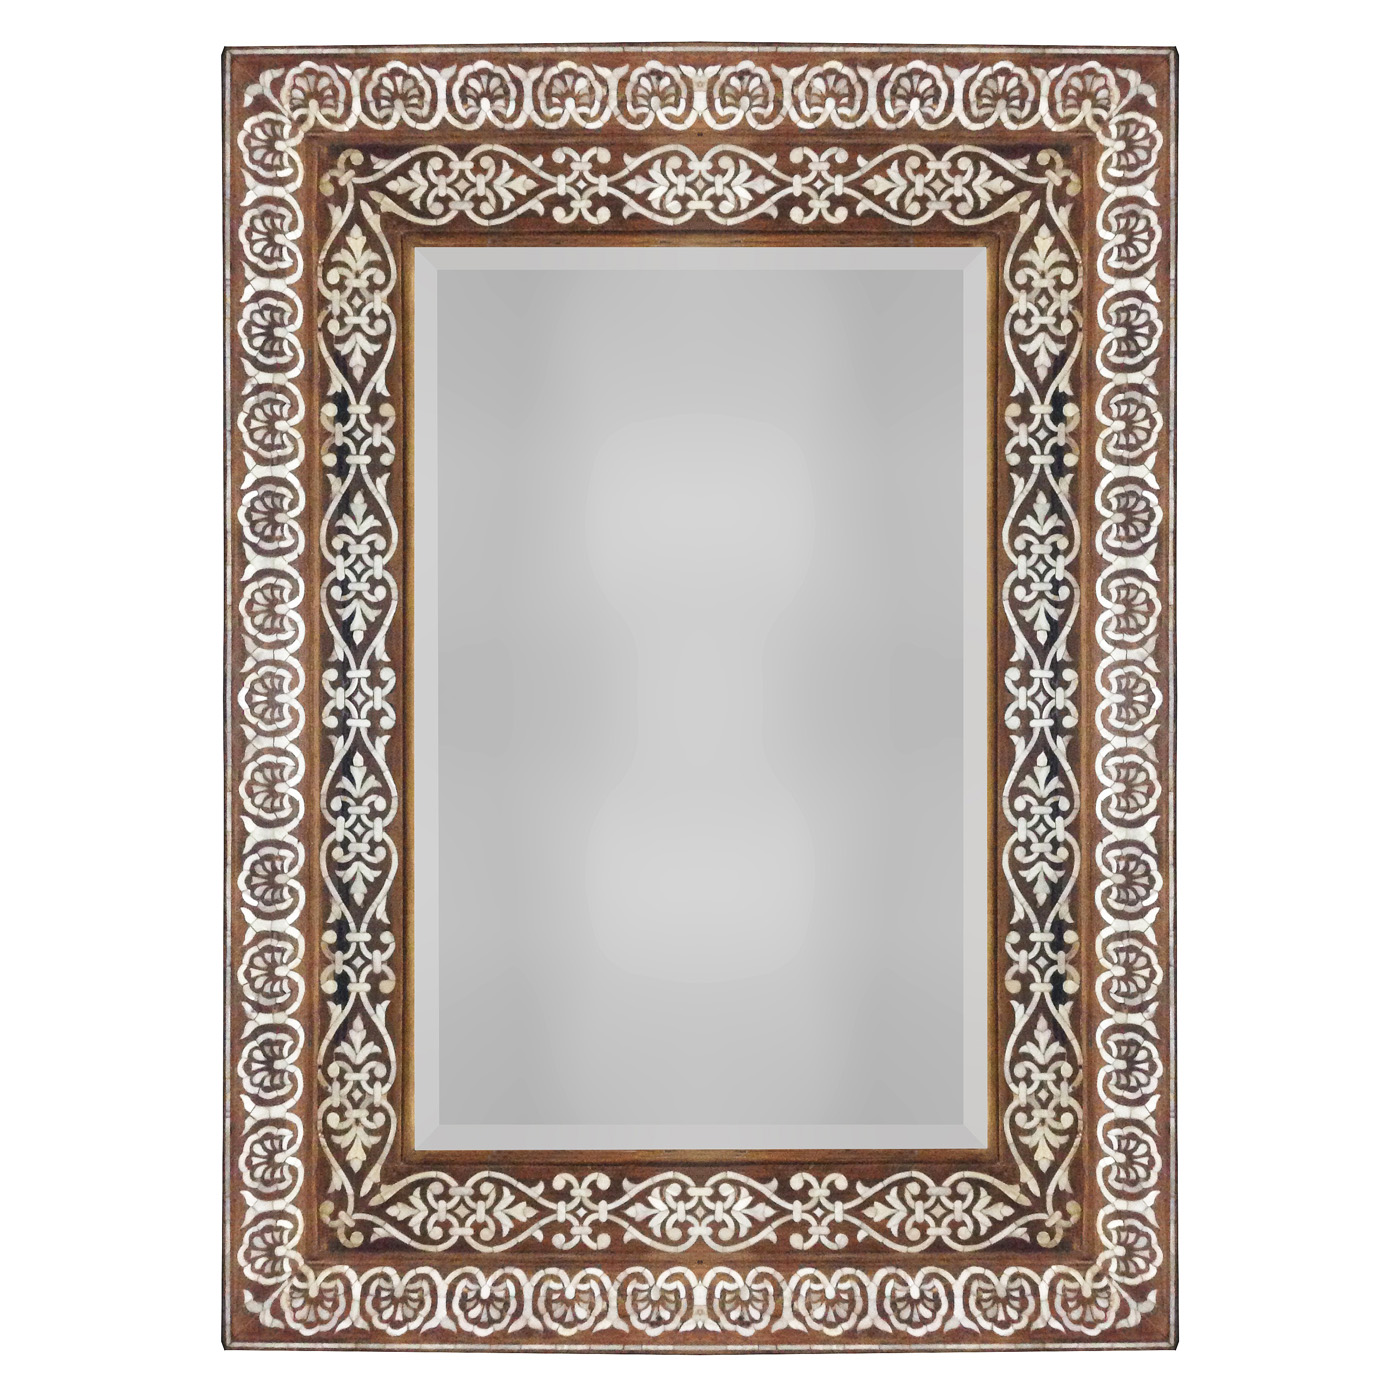 Wall Mounted Mirror Wood Frame Inlaid Mother of Pearl & Arabesque Work 14"x10" 